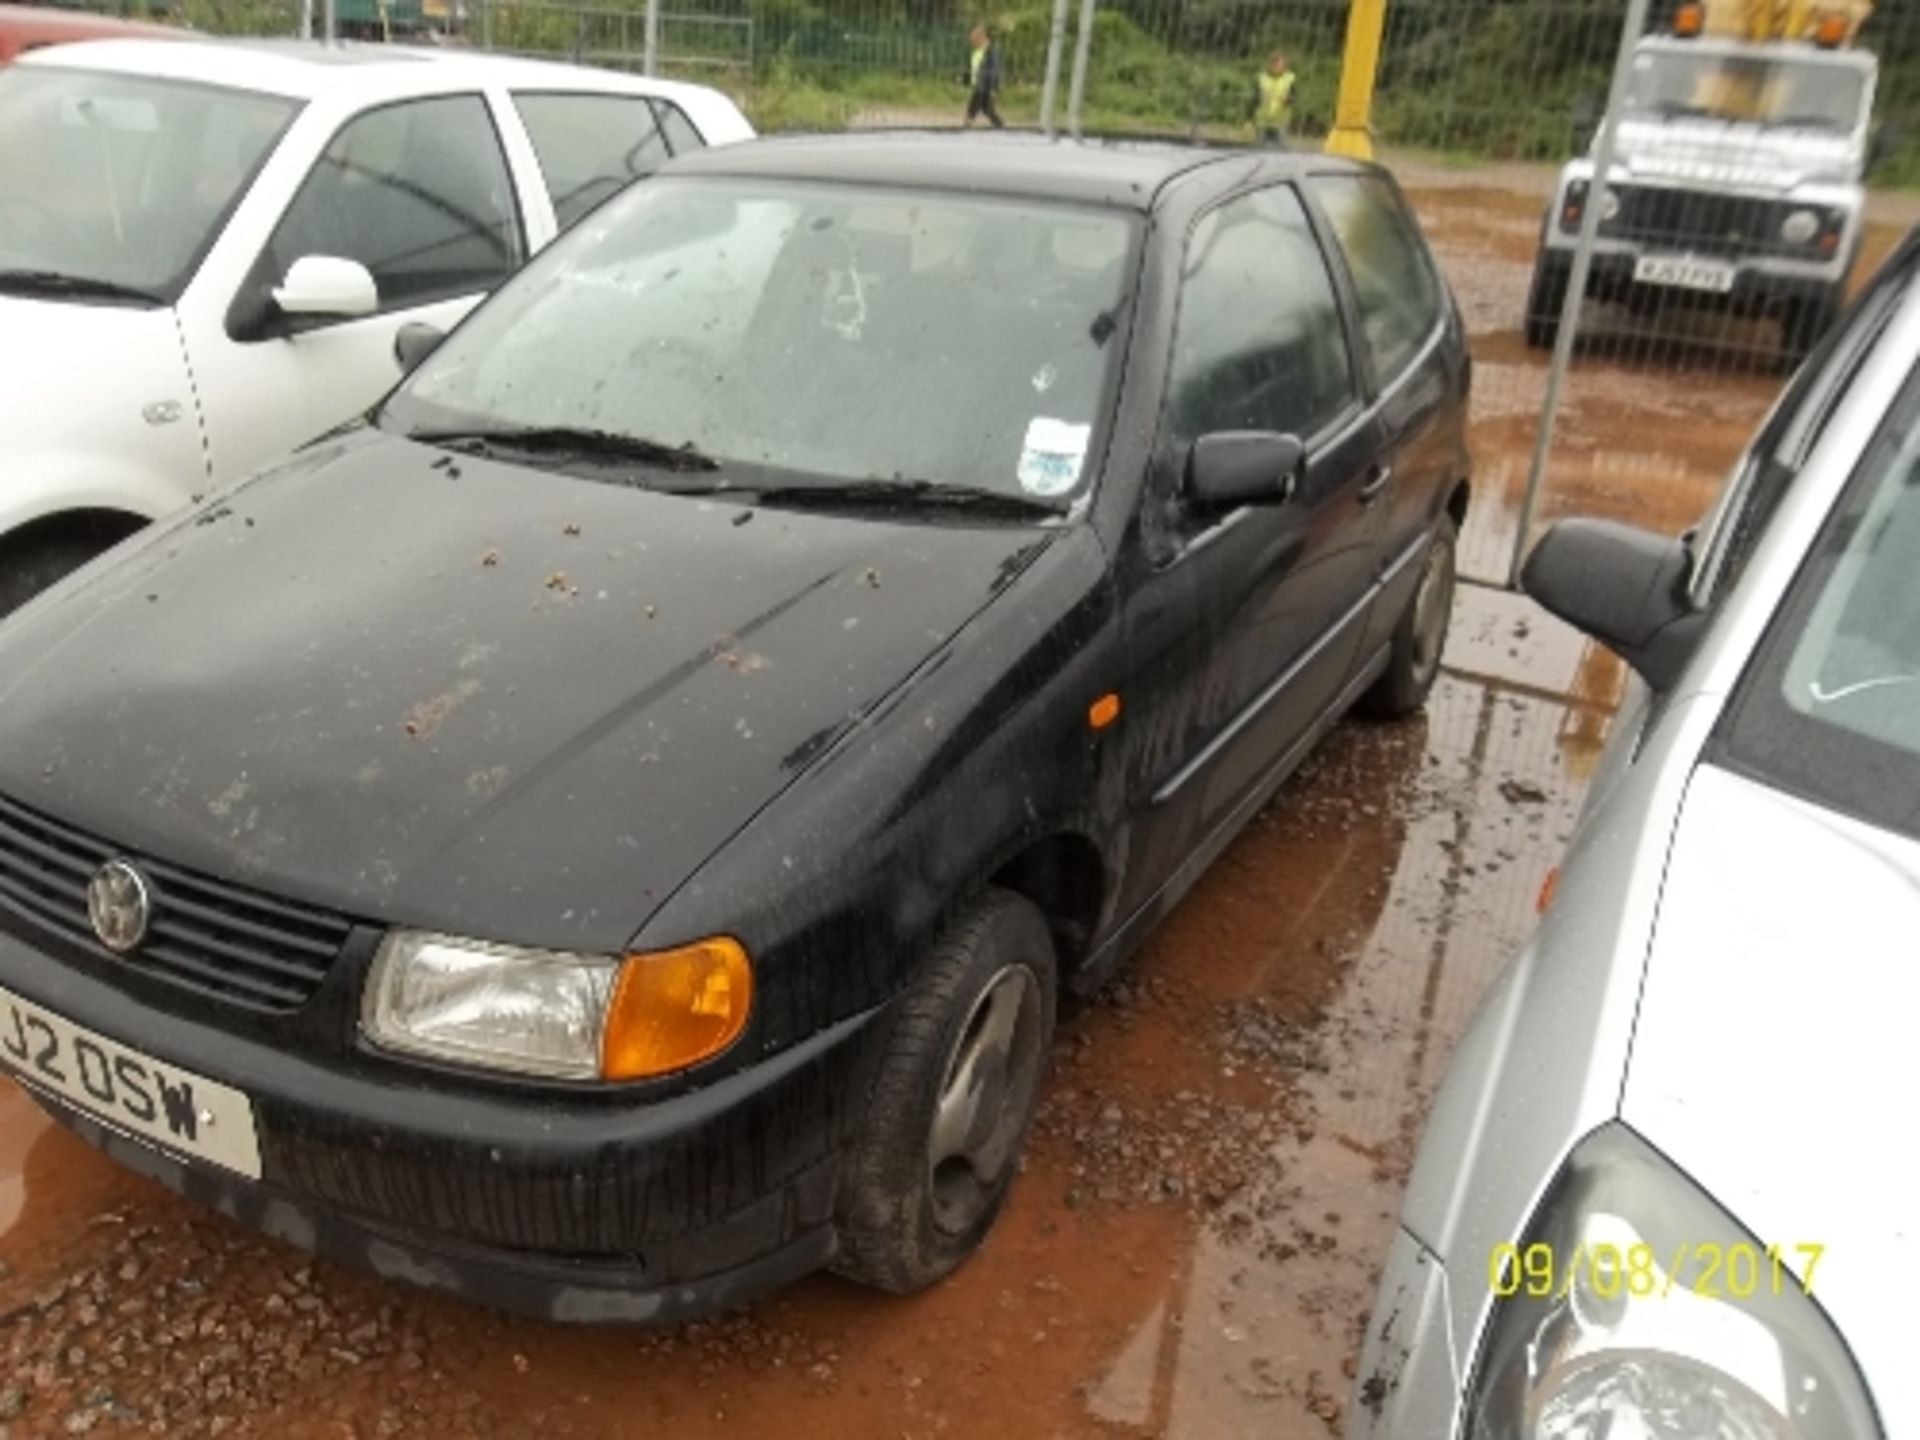 Volkswagen Polo 1.4 CL - J2 OSW Date of registration: 16.08.1996 1390cc, petrol, manual, black - Image 5 of 5